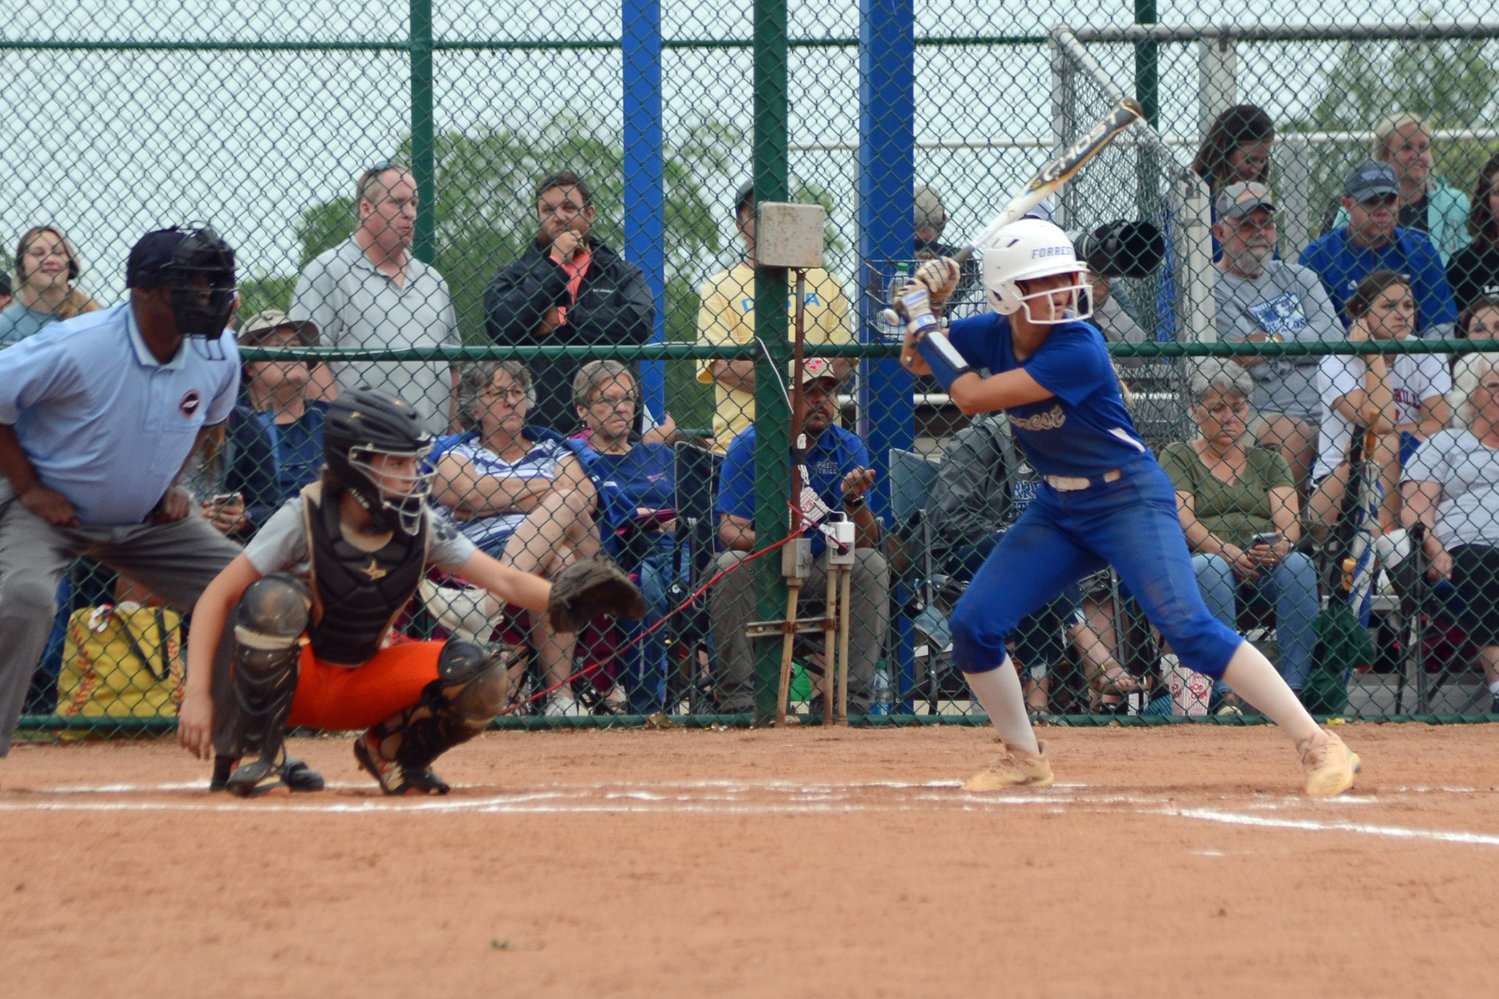 Briley Burnham had a big game for the Lady Rockets, going 2-for-3 at the plate with an RBI and Burnham scored the go-ahead run in the bottom of the sixth inning.